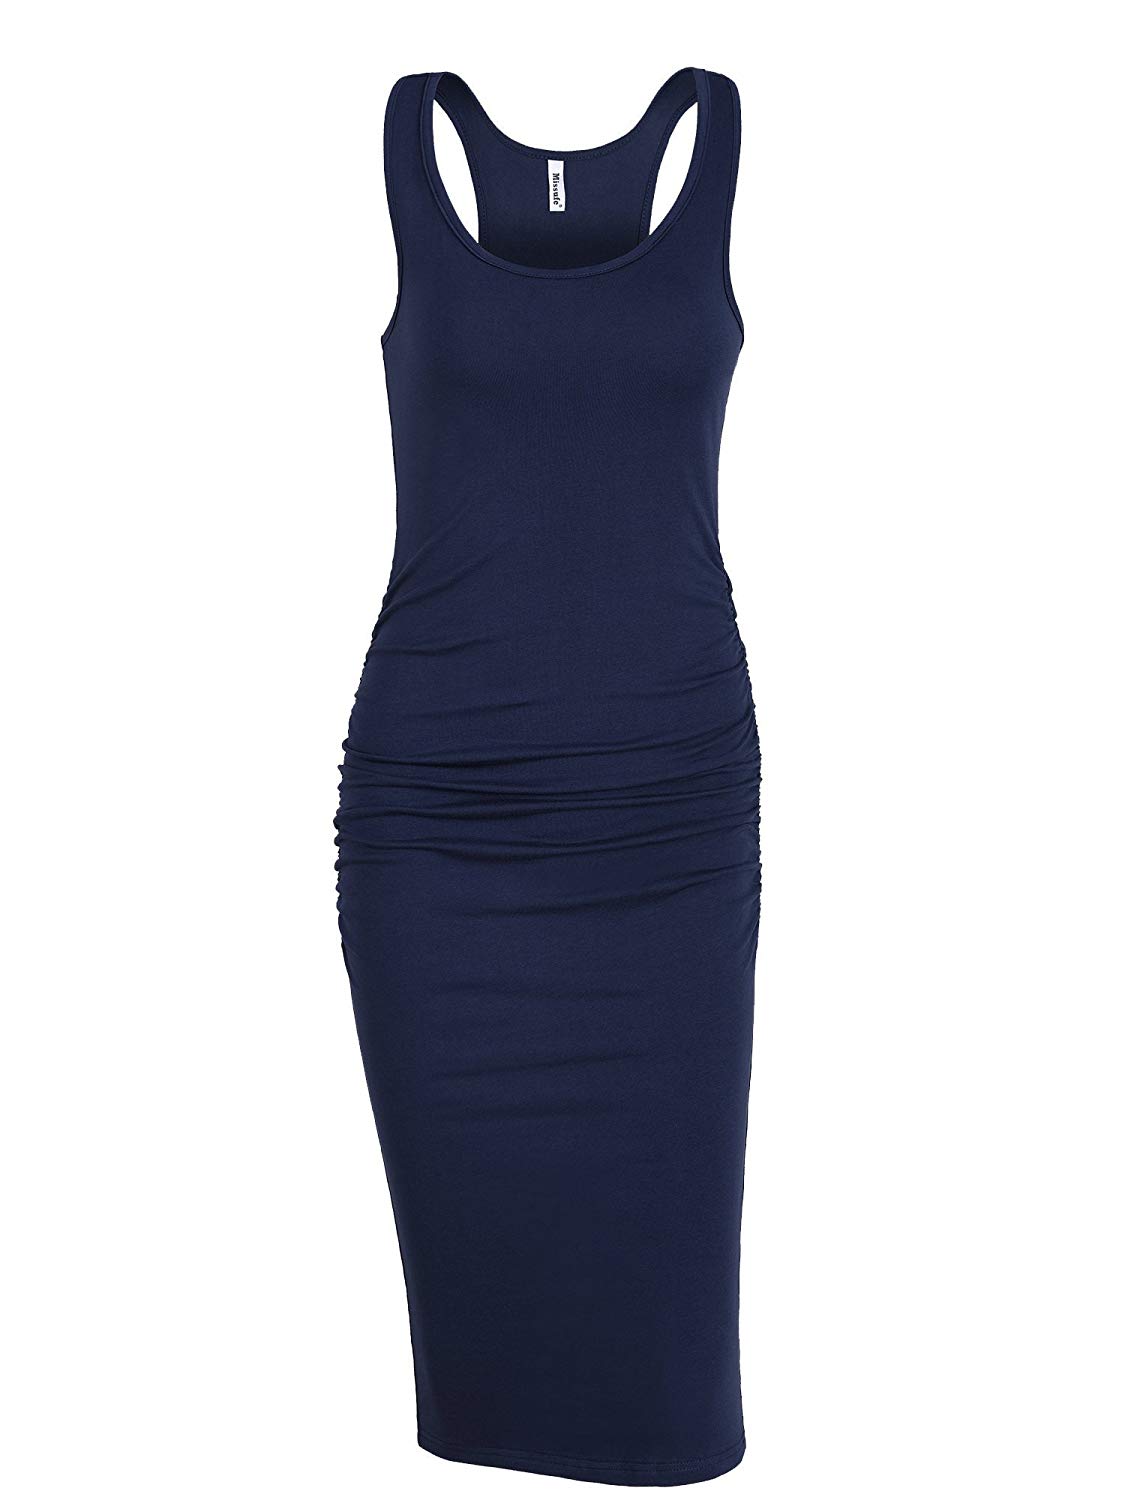 Missufe Women's Ruched Bodycon Sundress Midi Fitted, Navy Blue, Size X ...